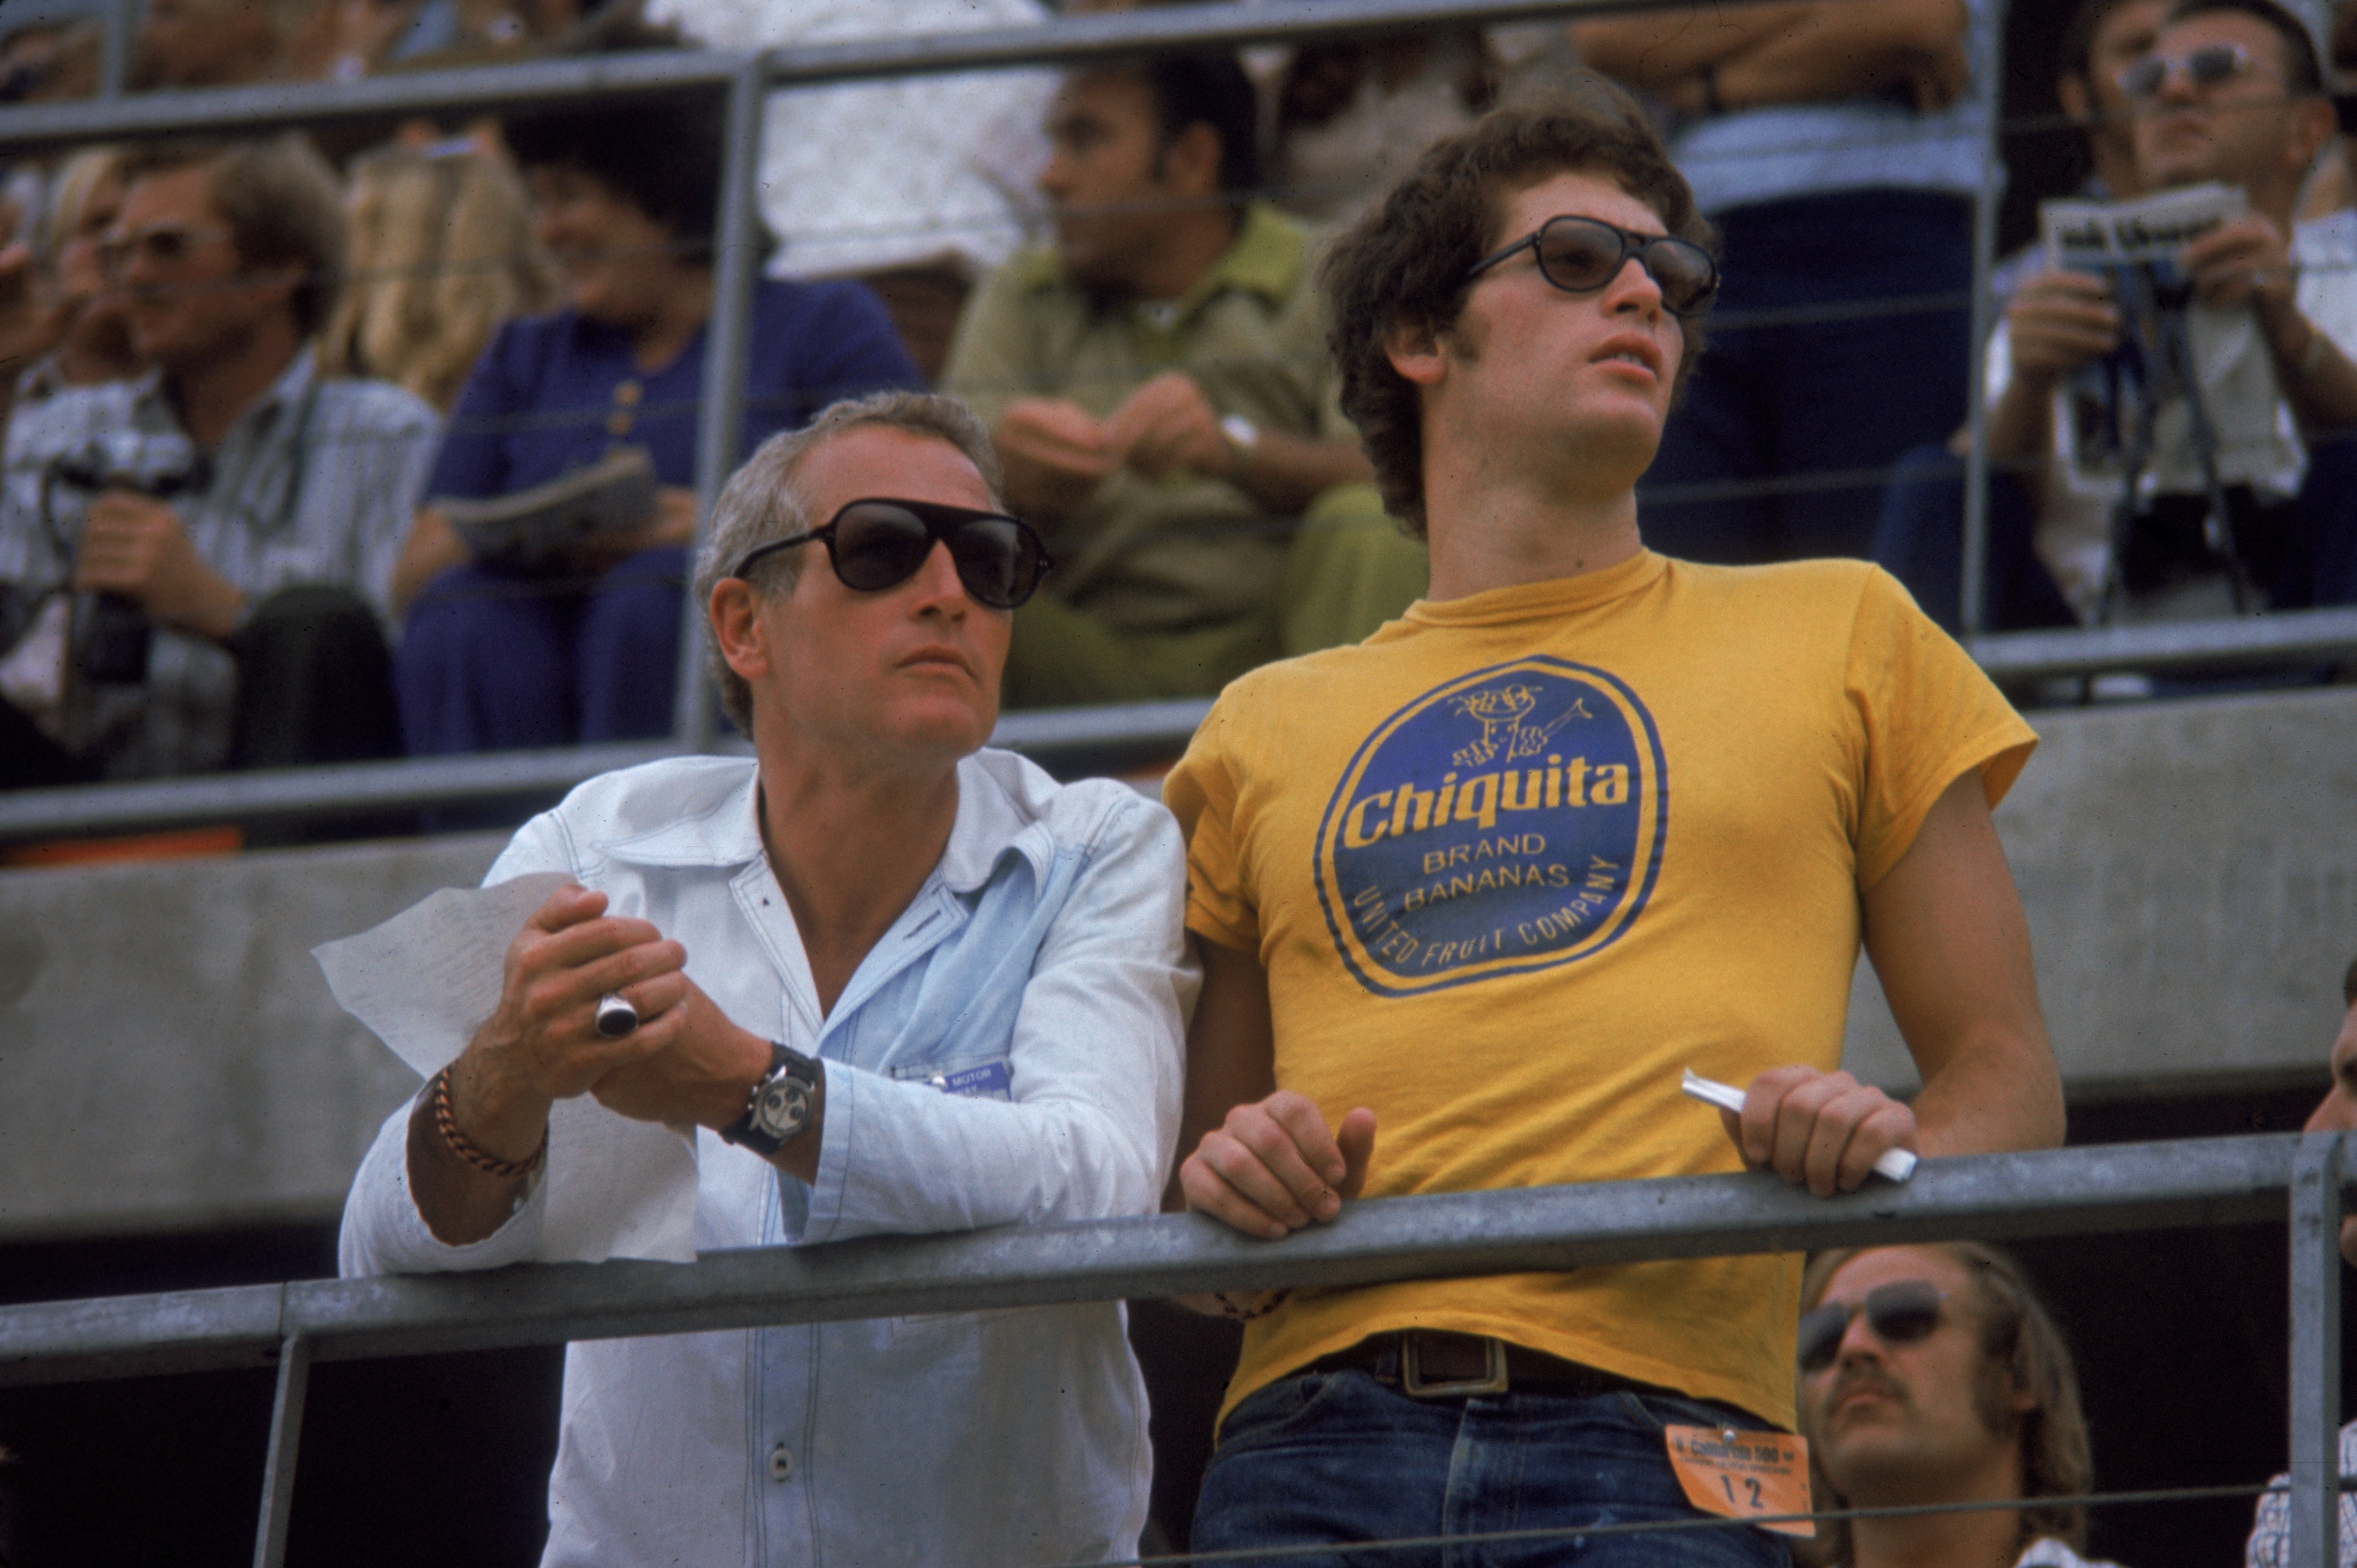 Paul Newman and his son Scott Newman attend the Ontarion 500 automobile race on September 3, 1972, in Ontario, California, September 3, 1972. | Source: Getty Images